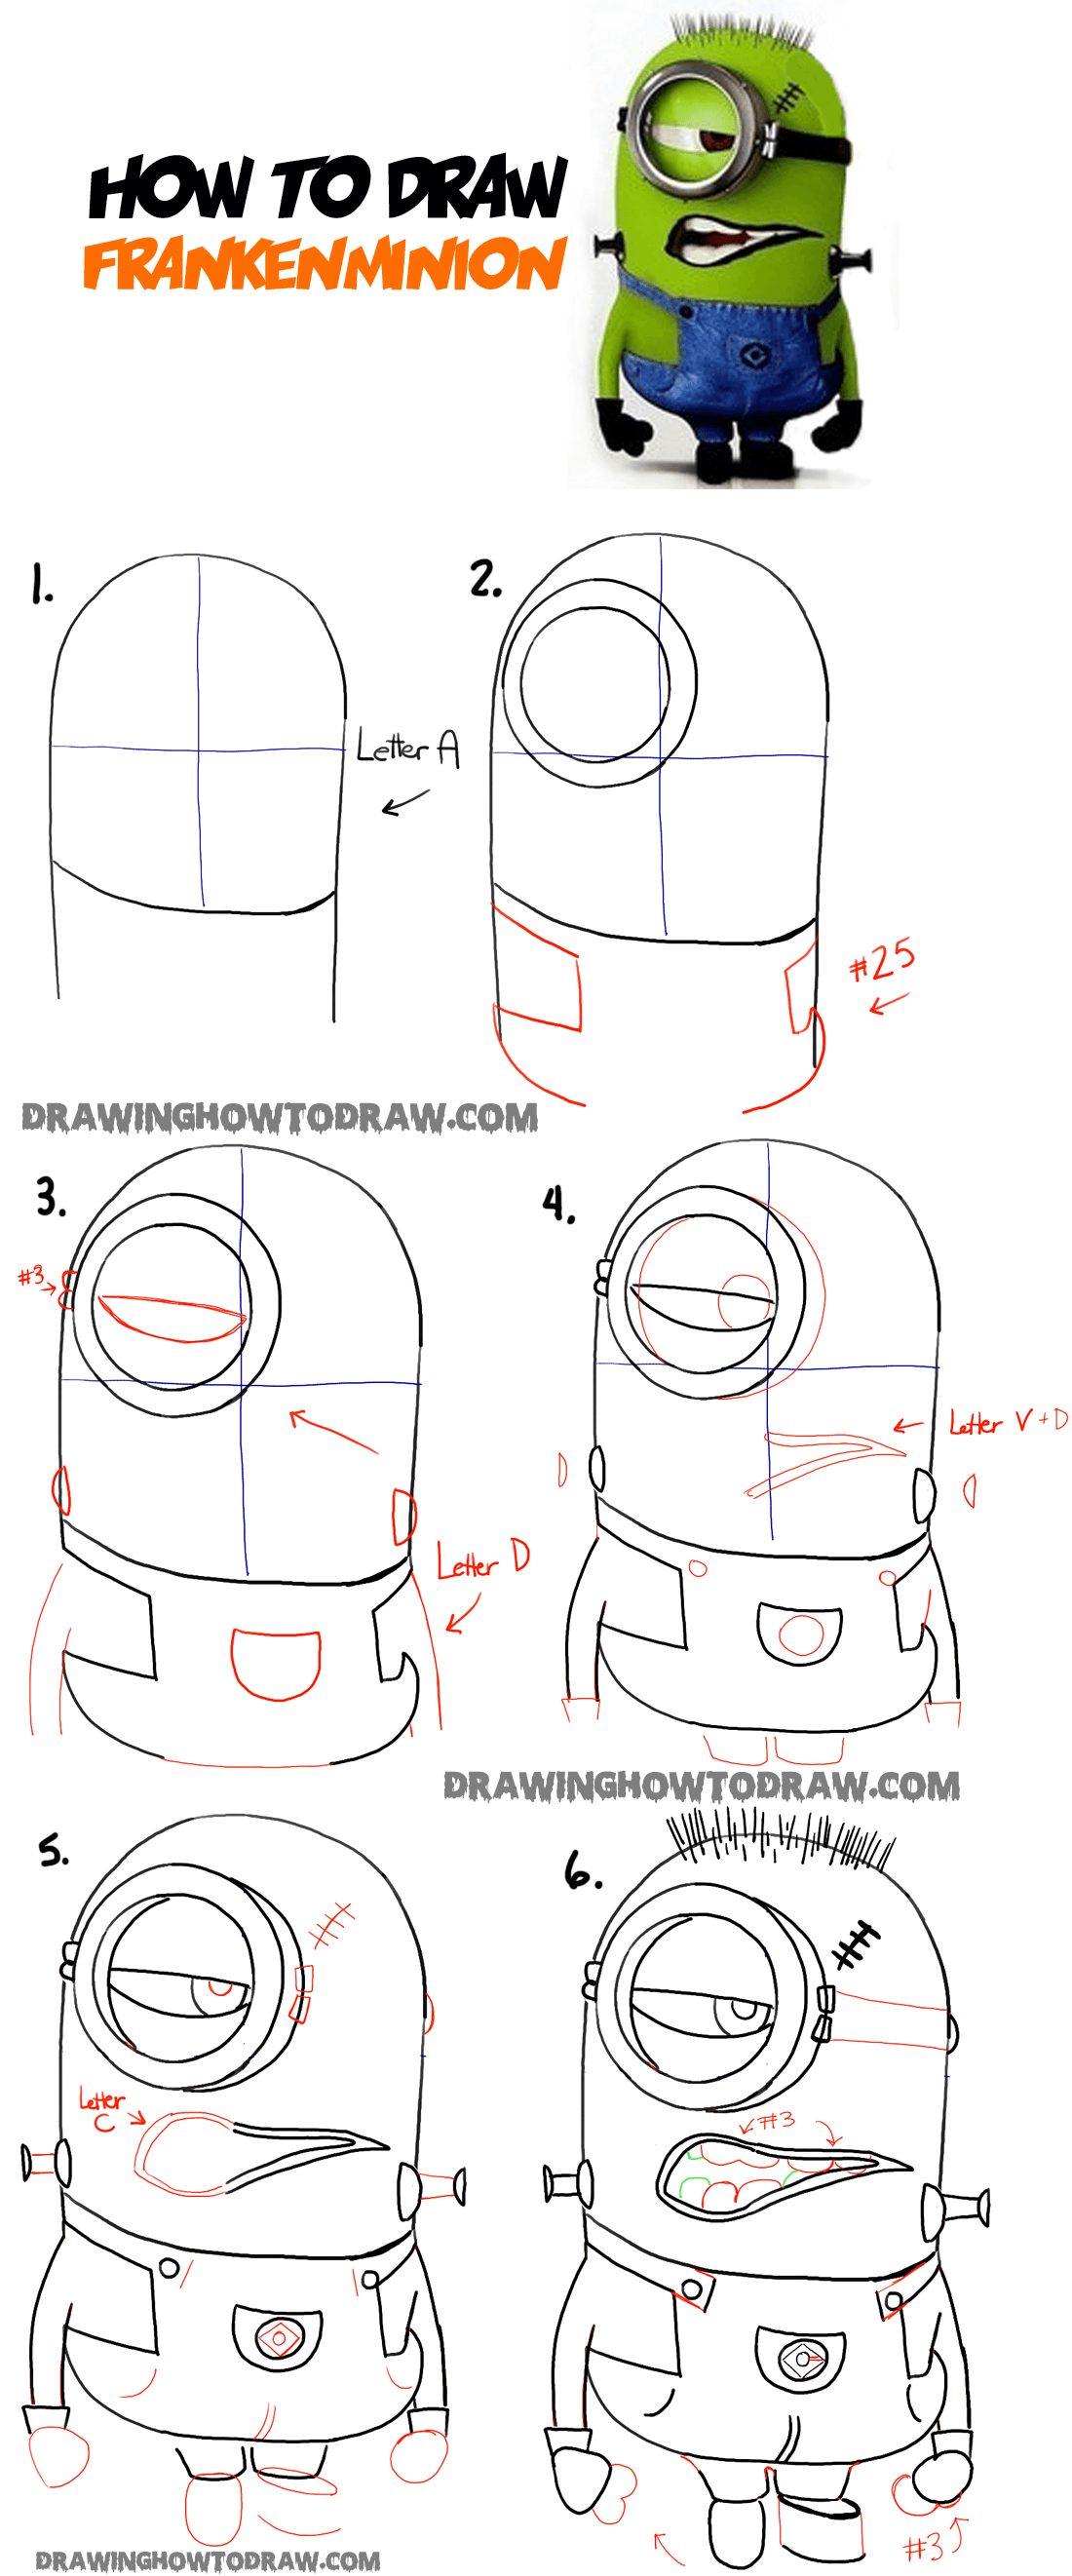 learn how to draw stuart the minion as frankenstein step by step drawing tutorial